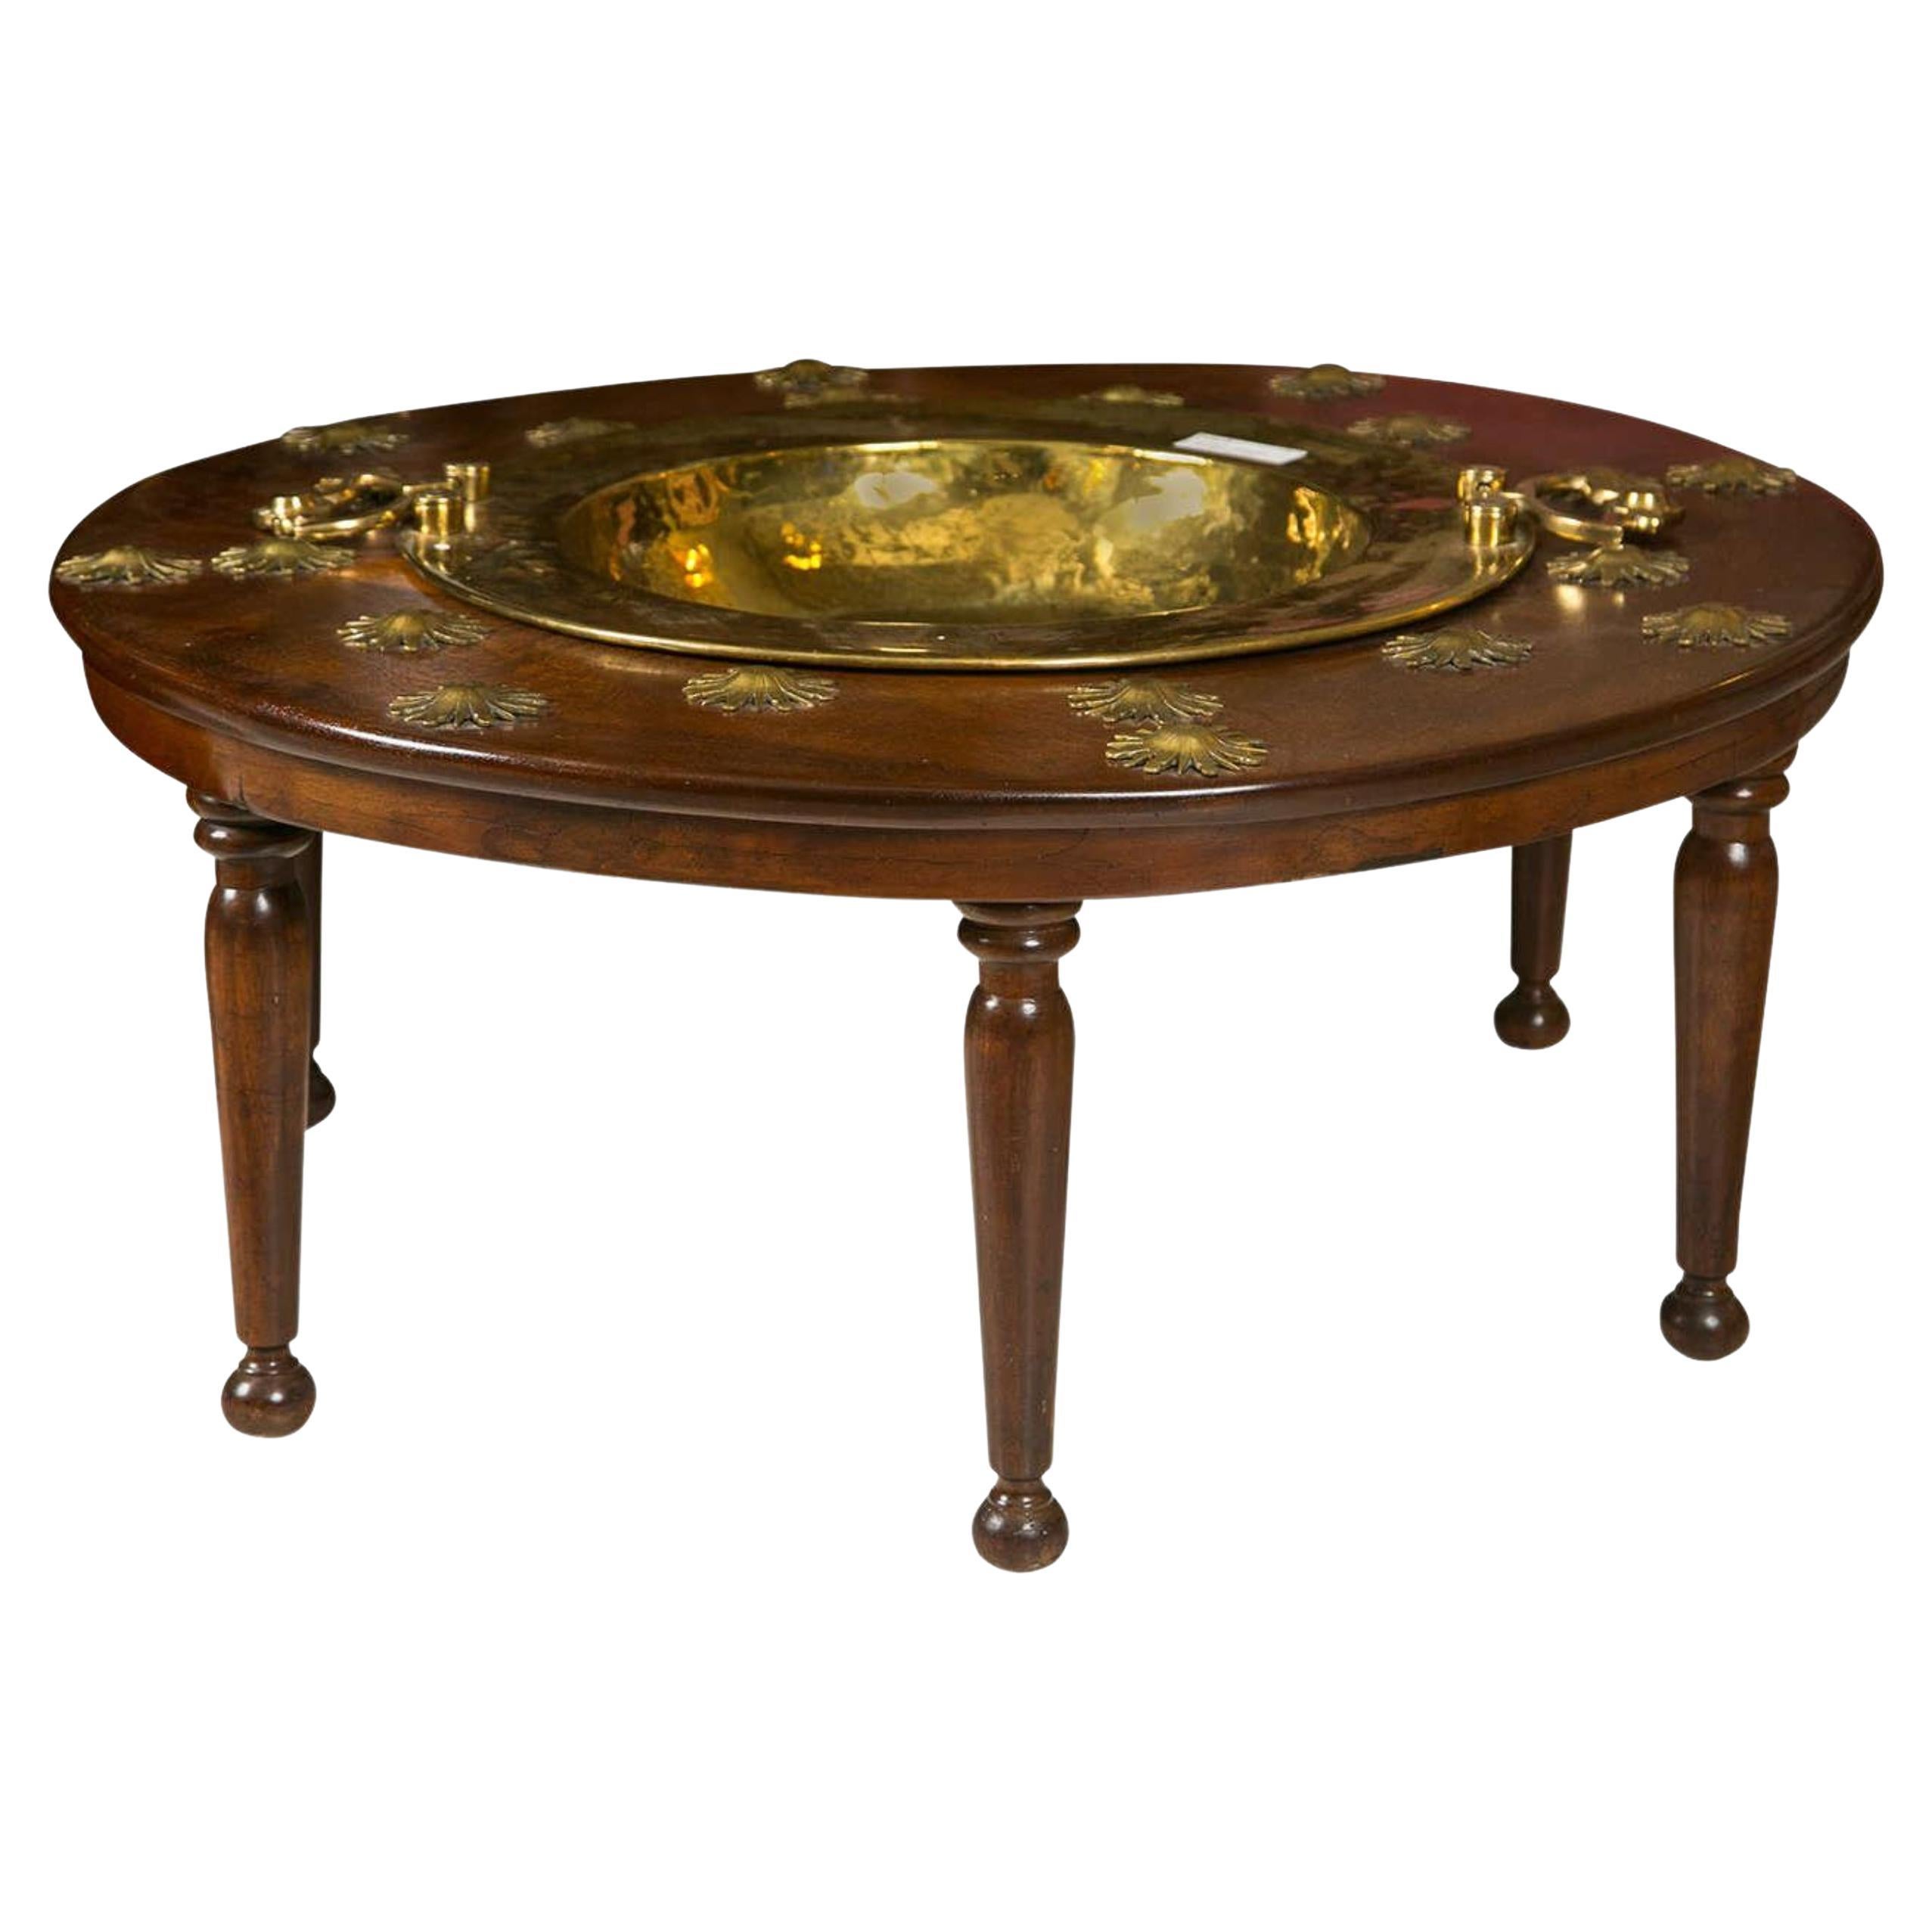 Antique 1880's Brass and Wooden Empire Style Brazier Bronze Mounted Table Top For Sale